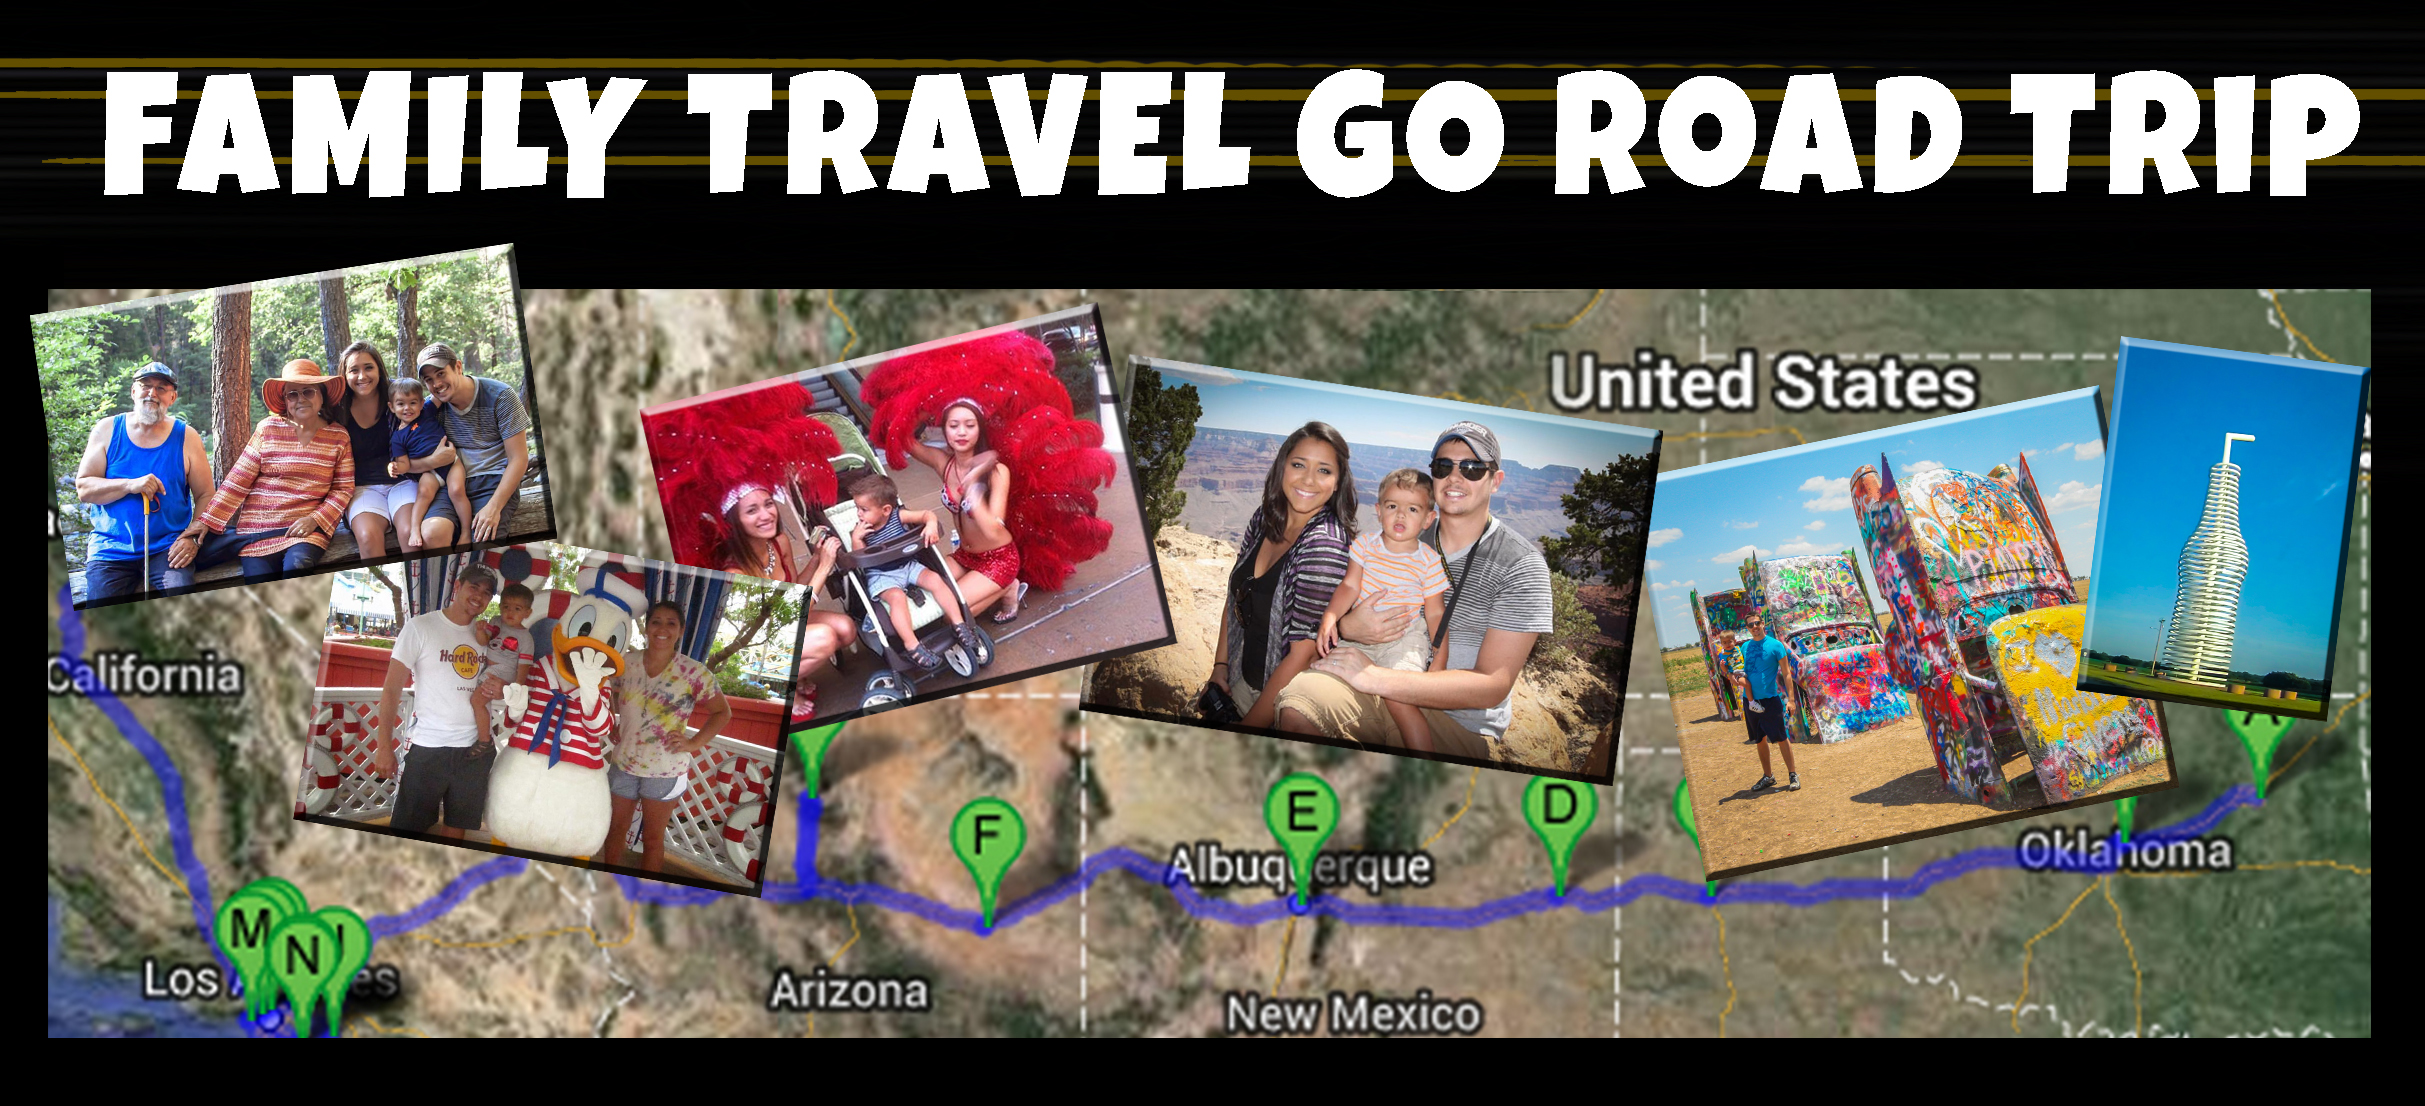 West Route 66 Road Trip Overview